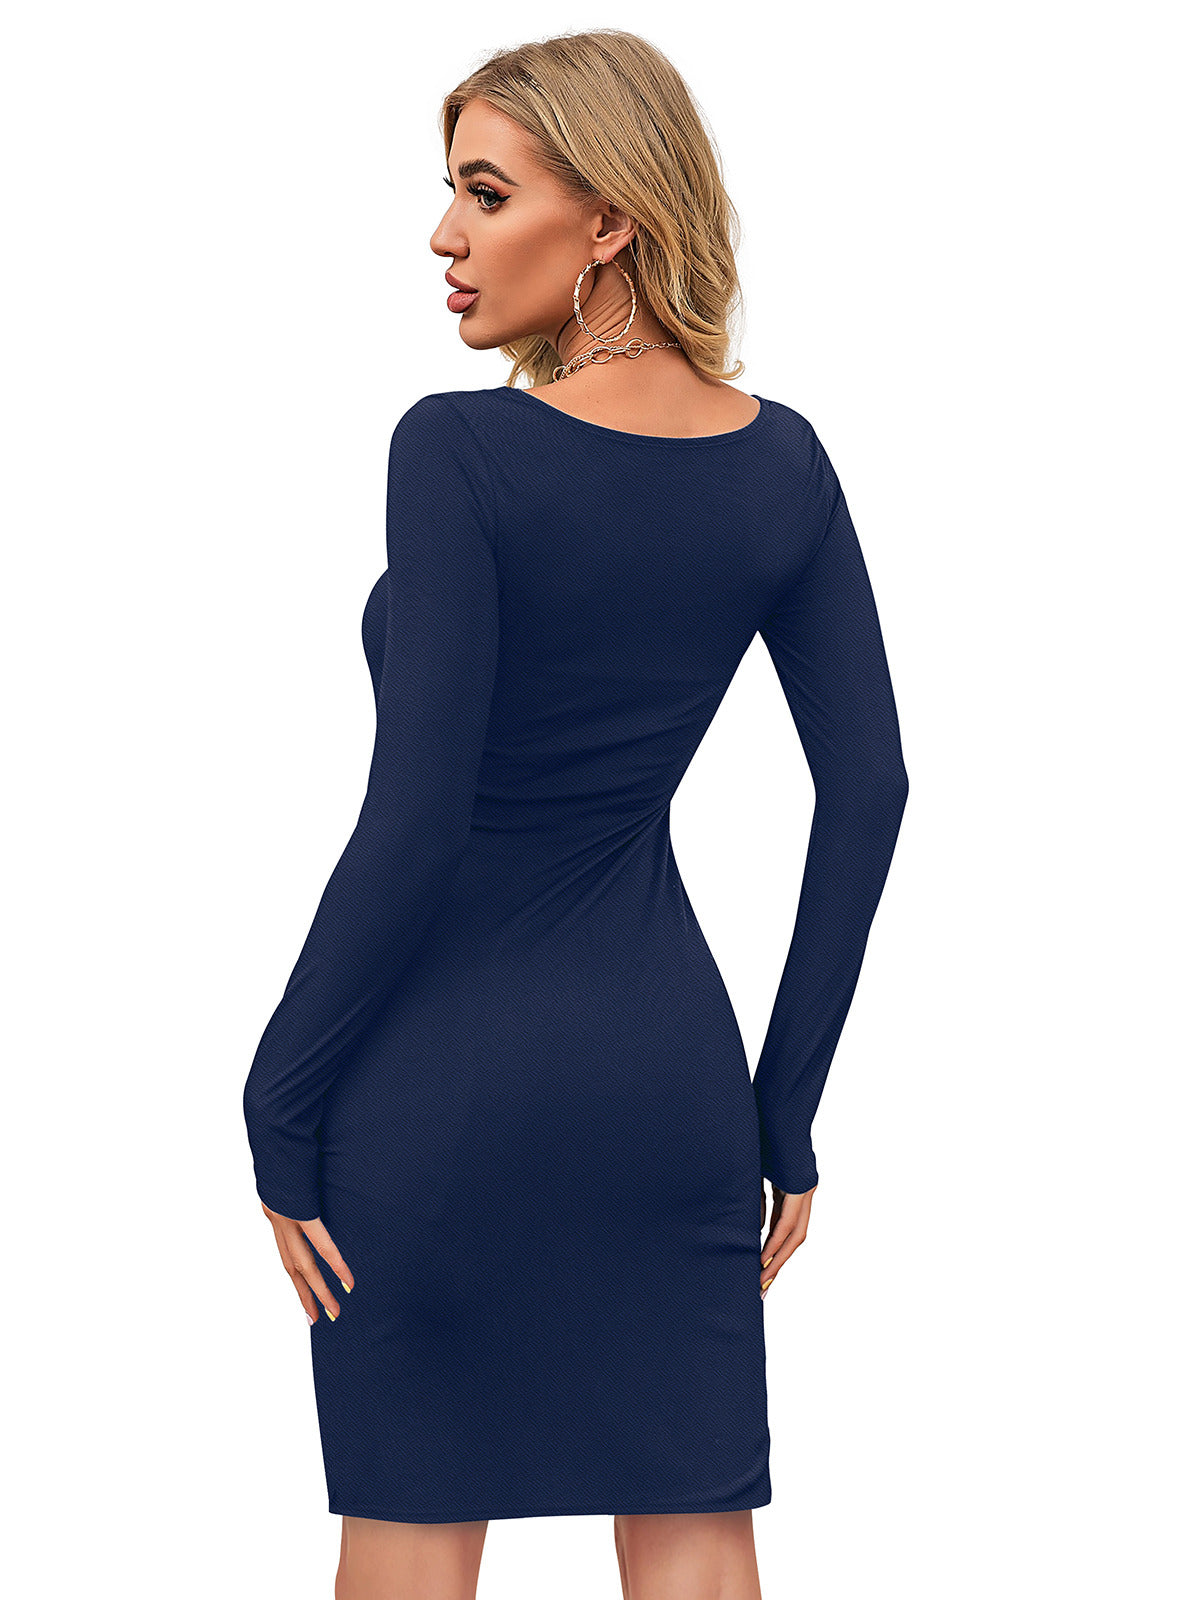 Odette Navy Blue Bodycon Knit Fabric For Women